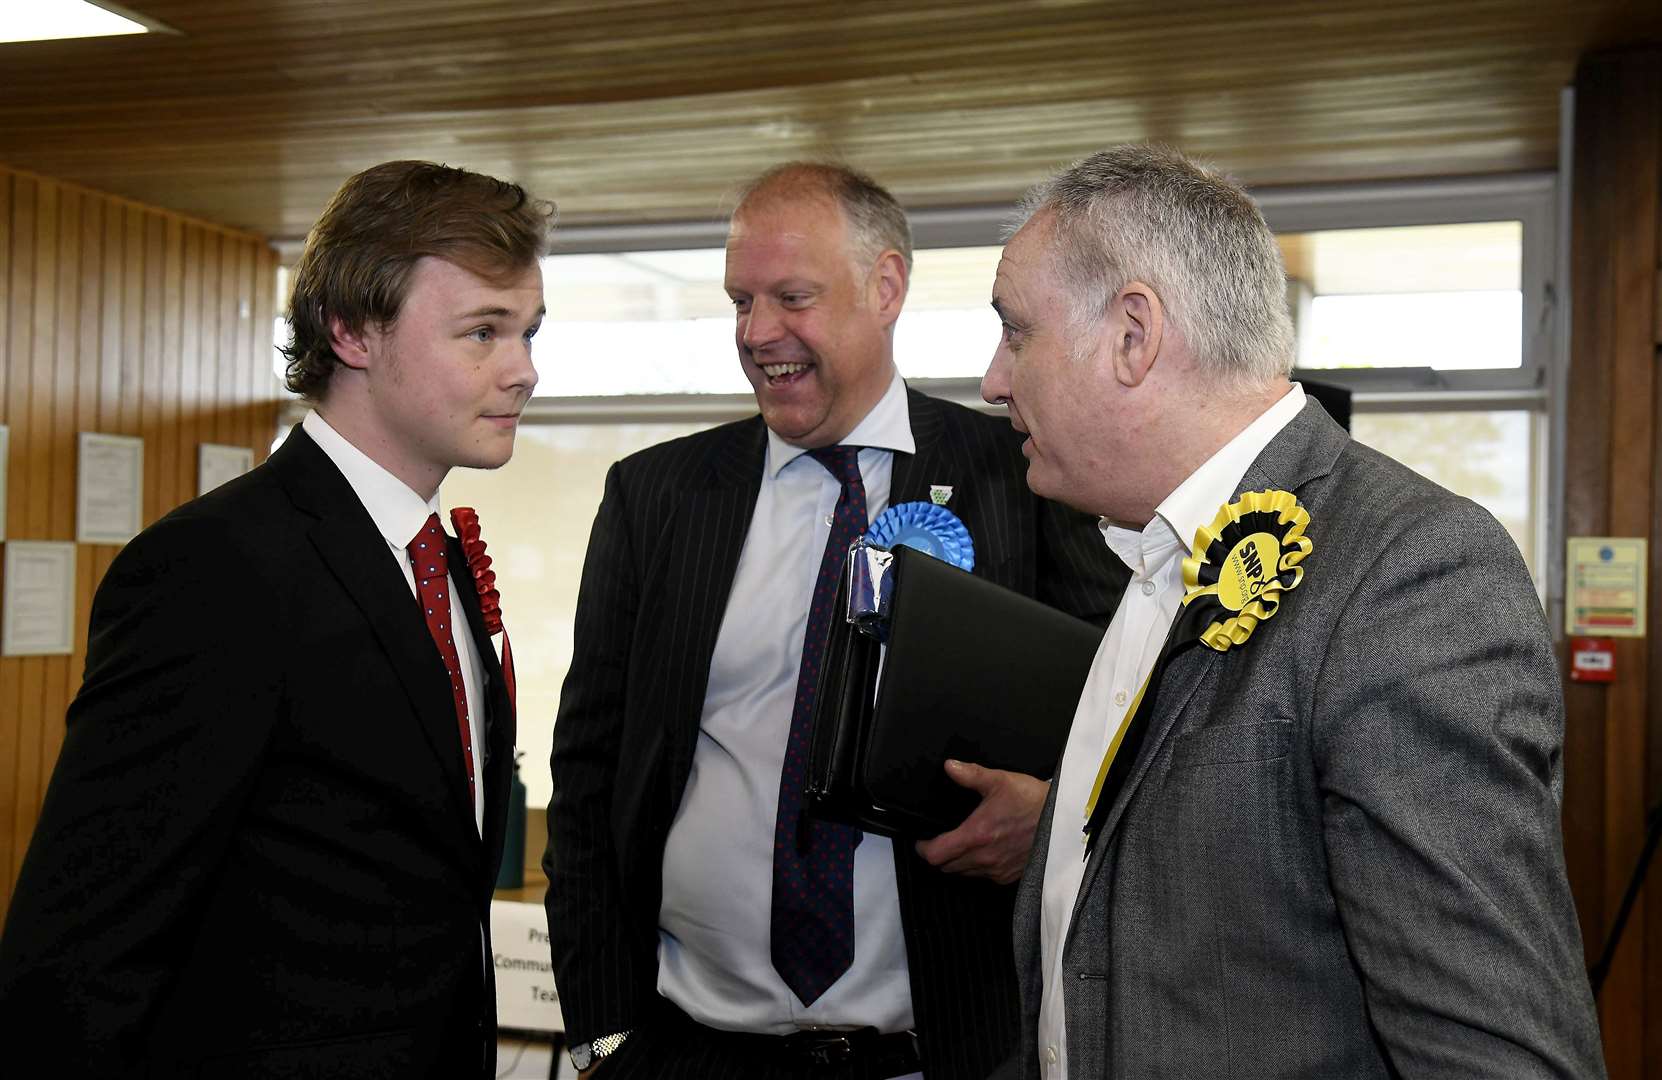 Teenage Labour councillor Ben Williams (left) is congratulated by Neil McLennan (Conservative joint leader) and Richard Lochhead MSP at the election count on May 5. Cllr Williams and his colleagues could hold the balance of power at the first meeting of the new council. Picture: Becky Saunderson